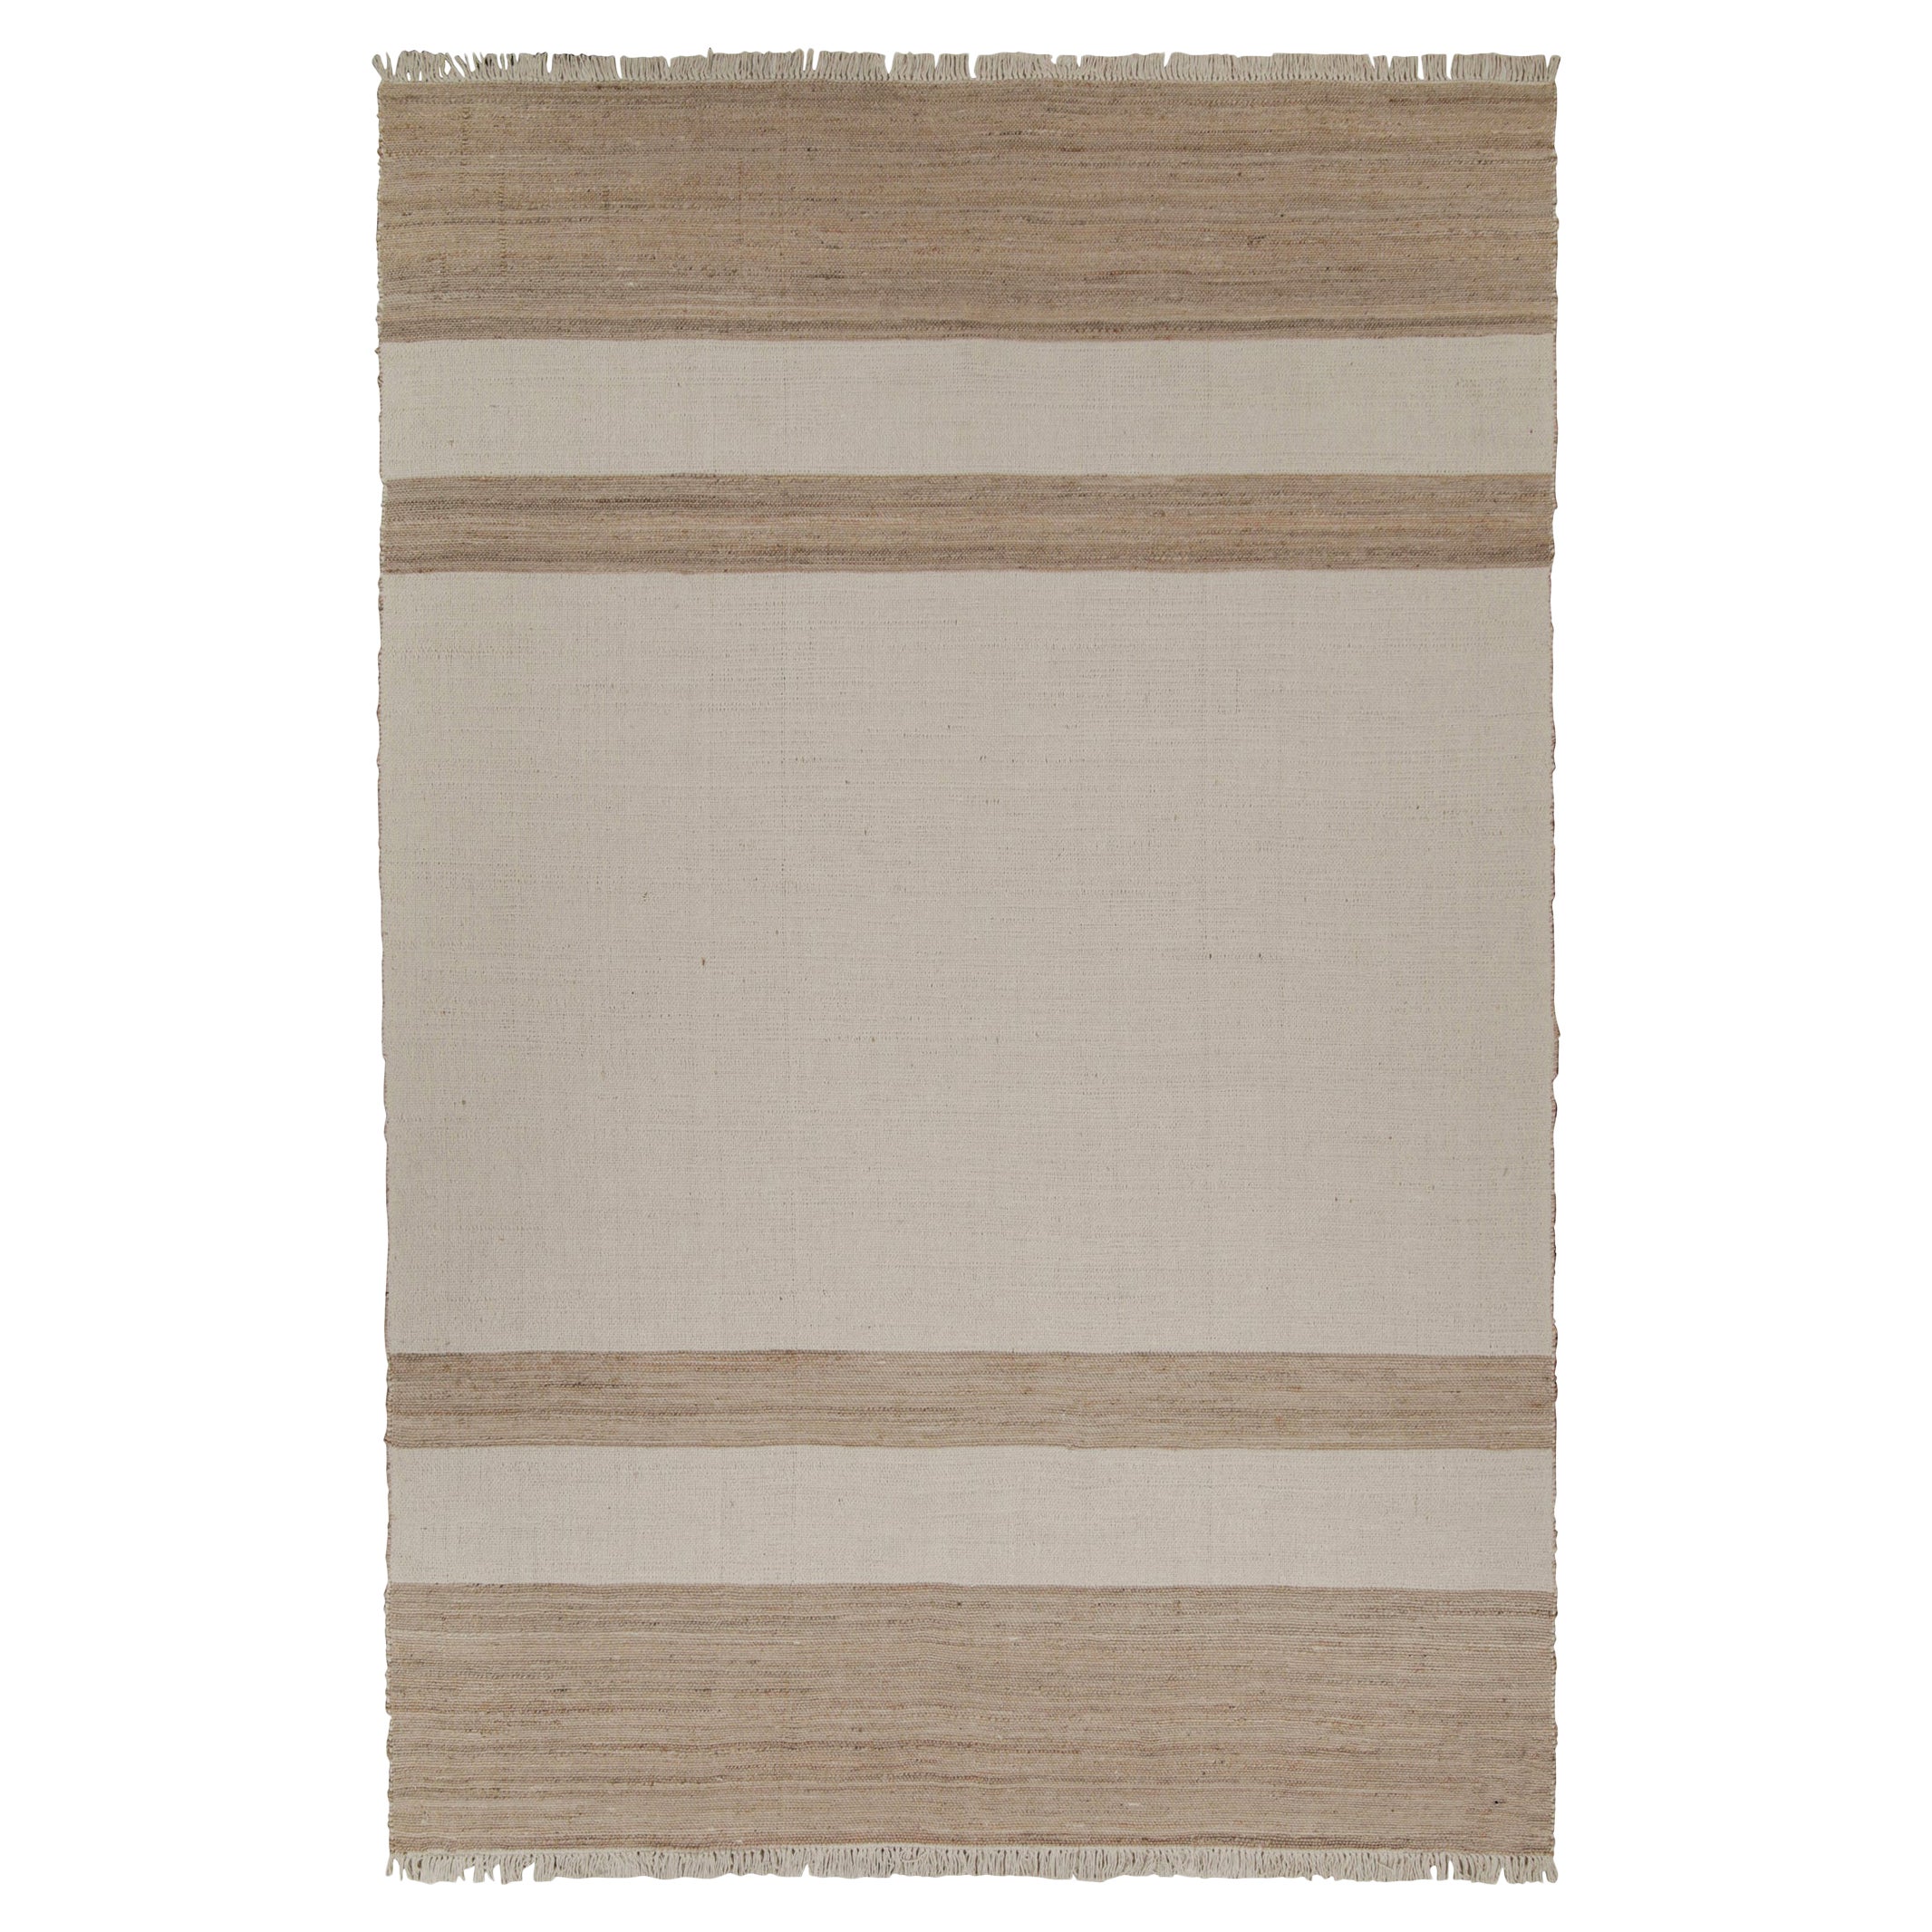 Rug & Kilim’s Contemporary Jute Kilim in White and Beige-Brown Stripes For Sale